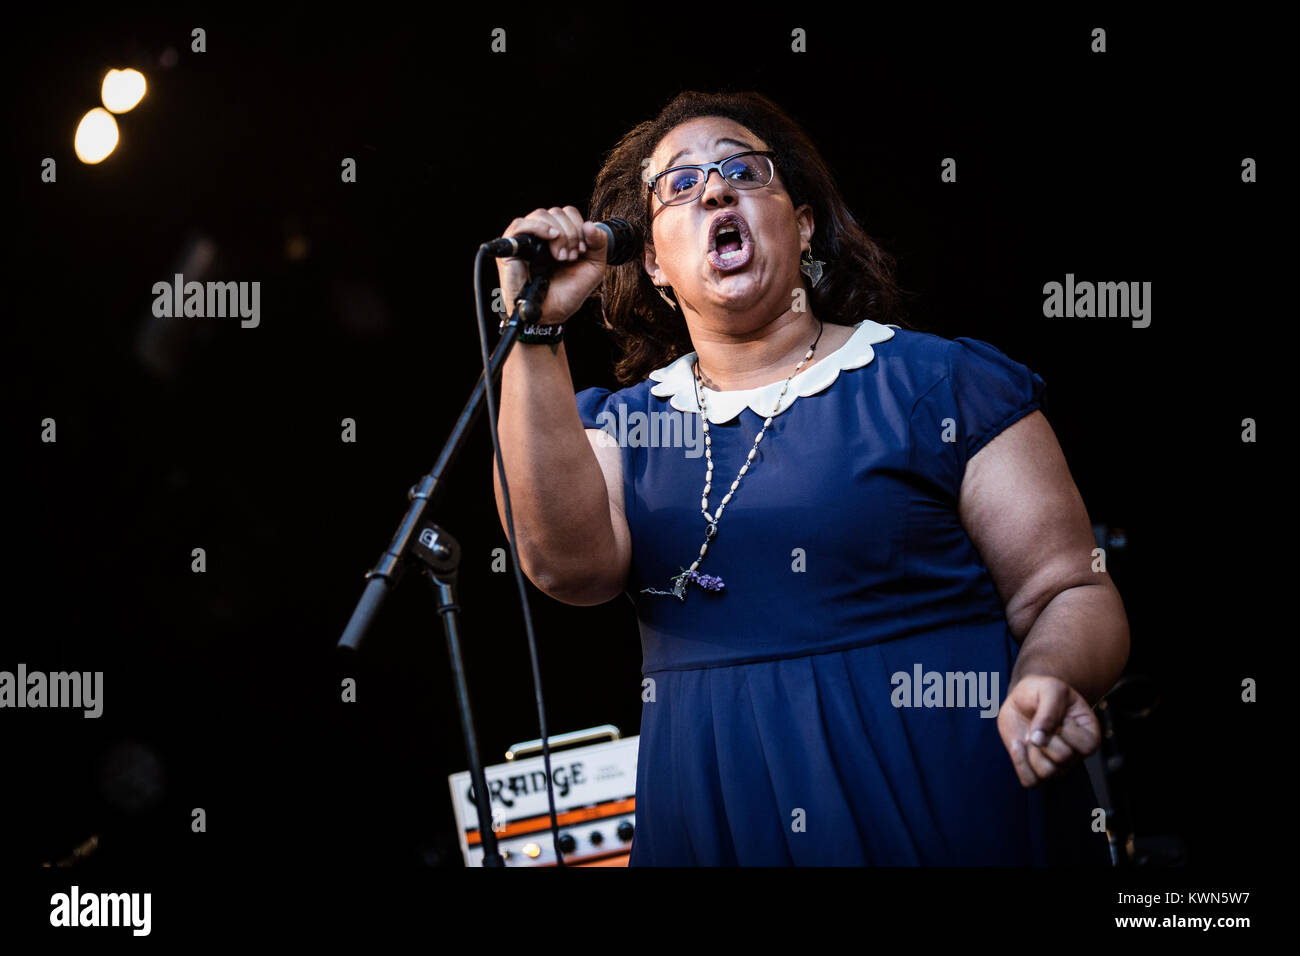 The American Singer And Musician Brittany Howard Is The Lead Singer And